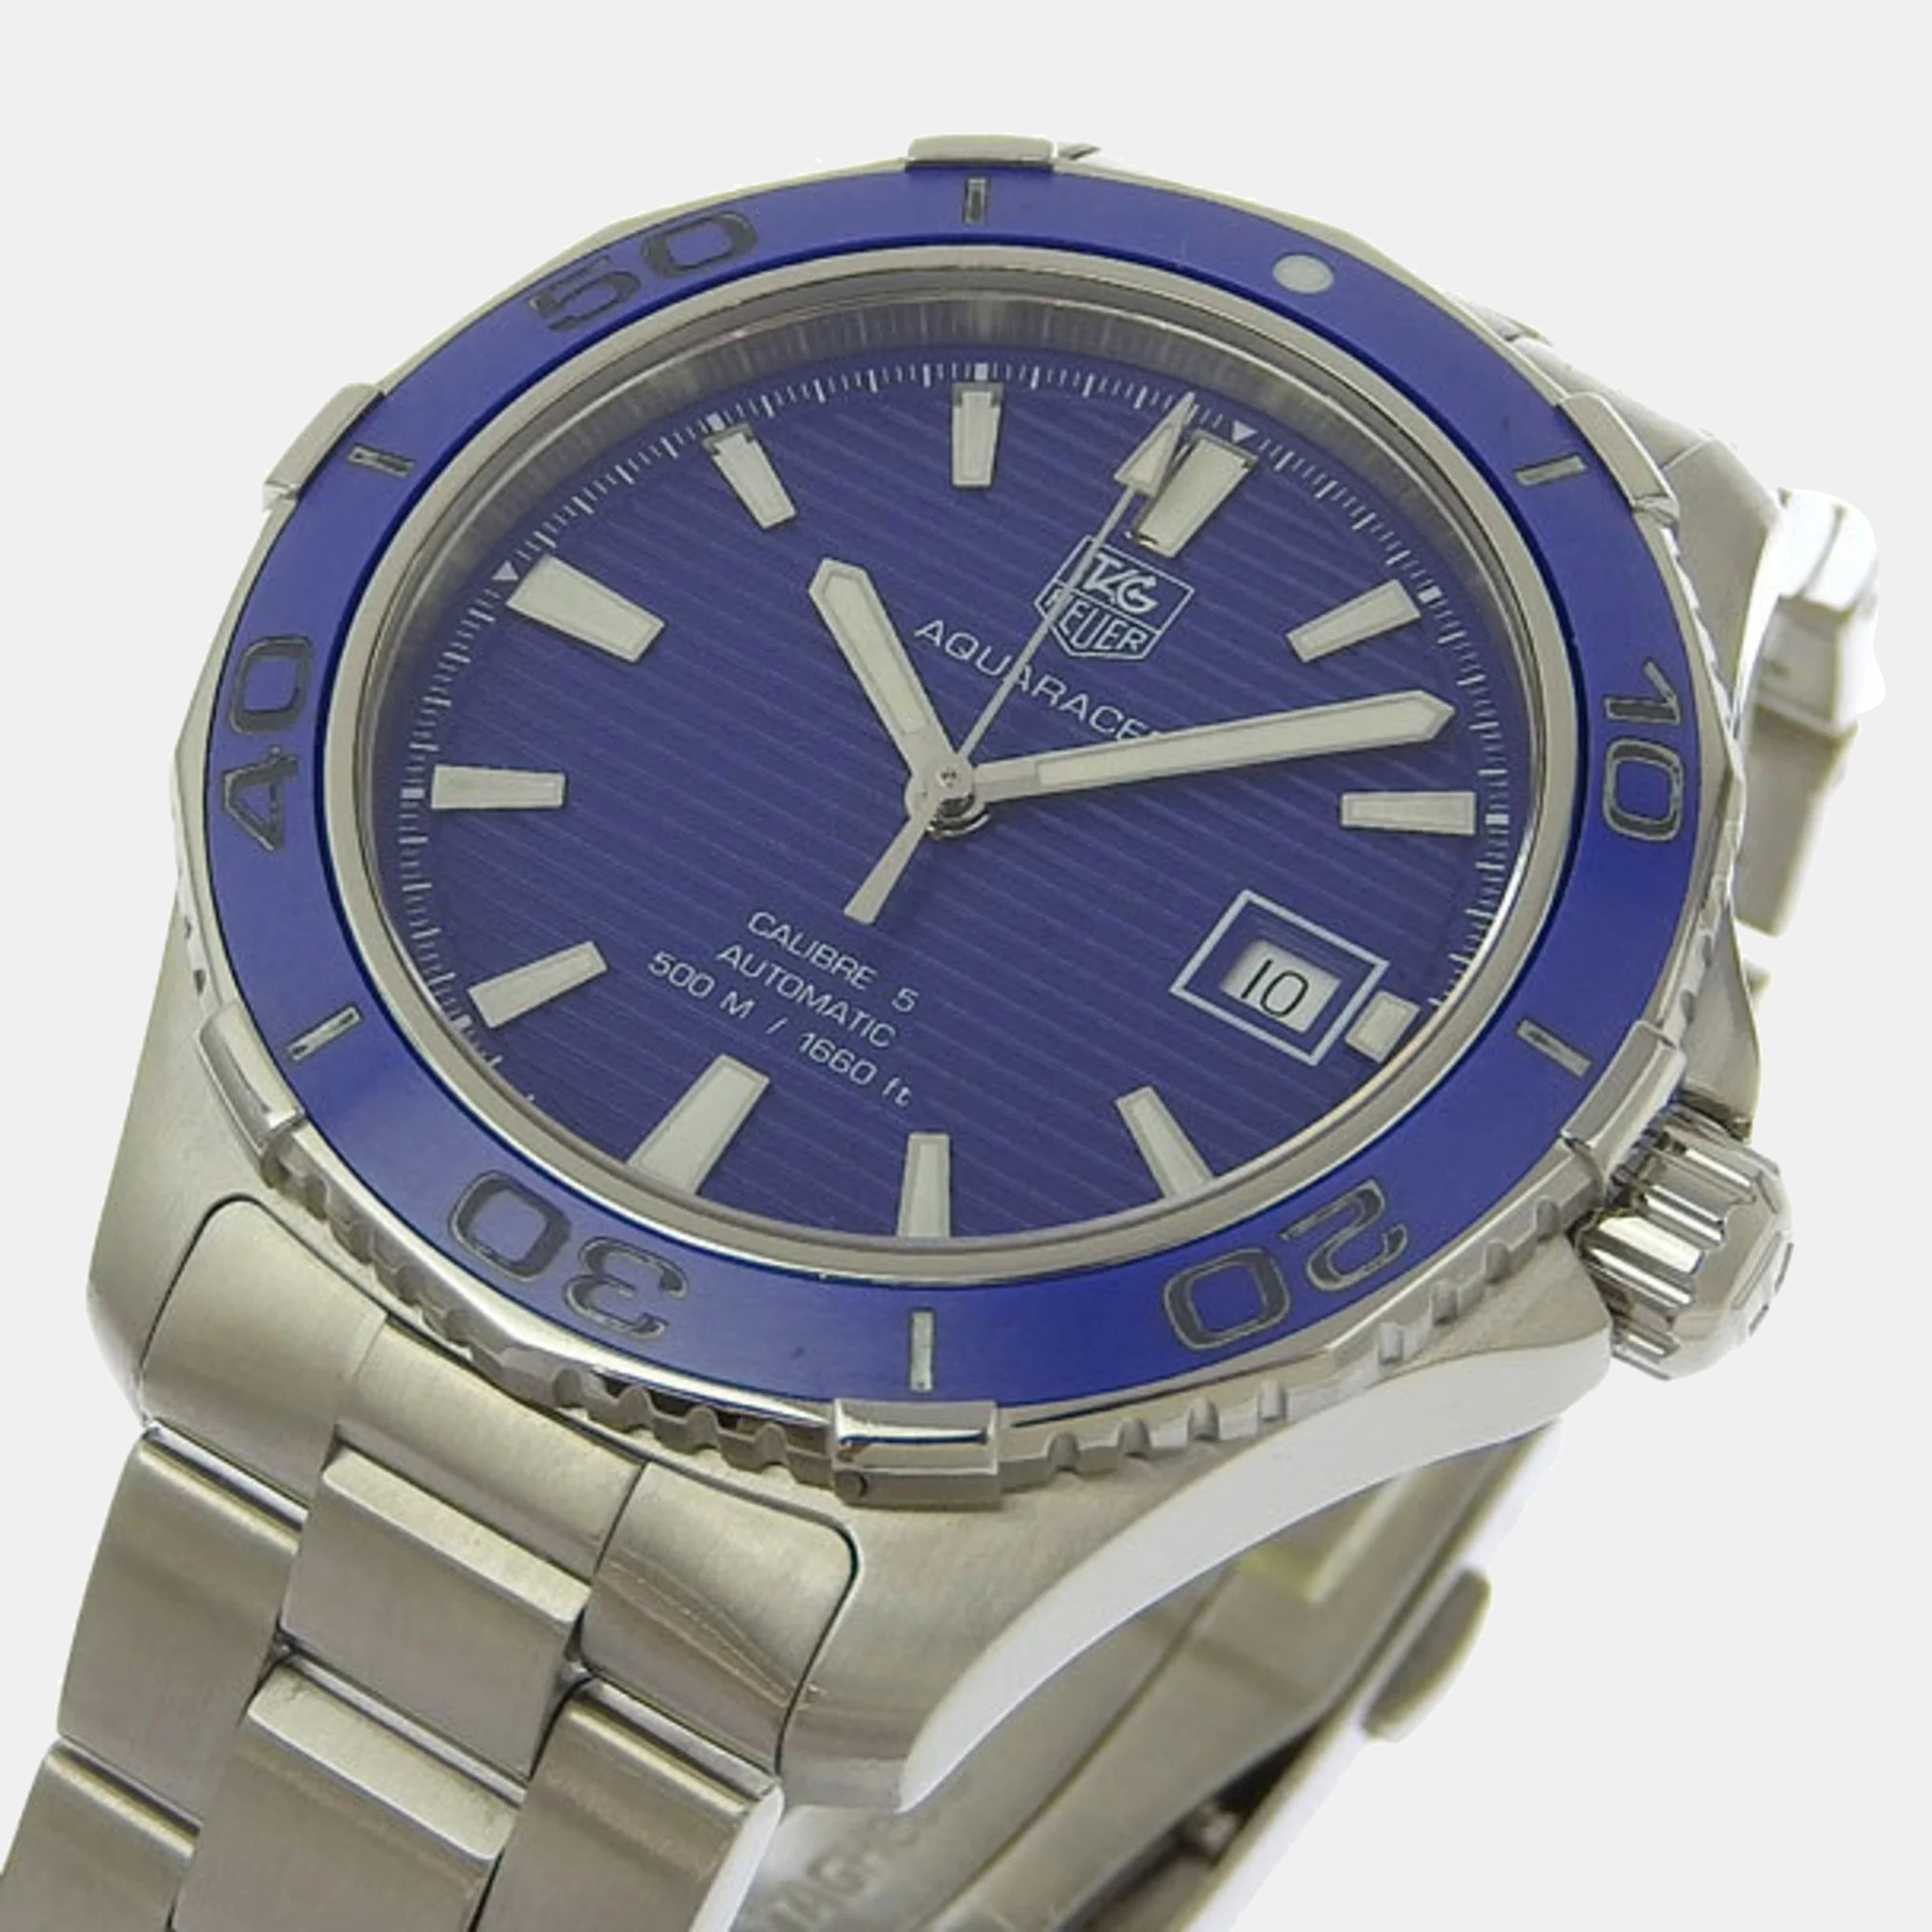 Tag Heuer Blue Stainless Steel Aquaracer WAK2111 Automatic Men's Wristwatch 41.5 Mm